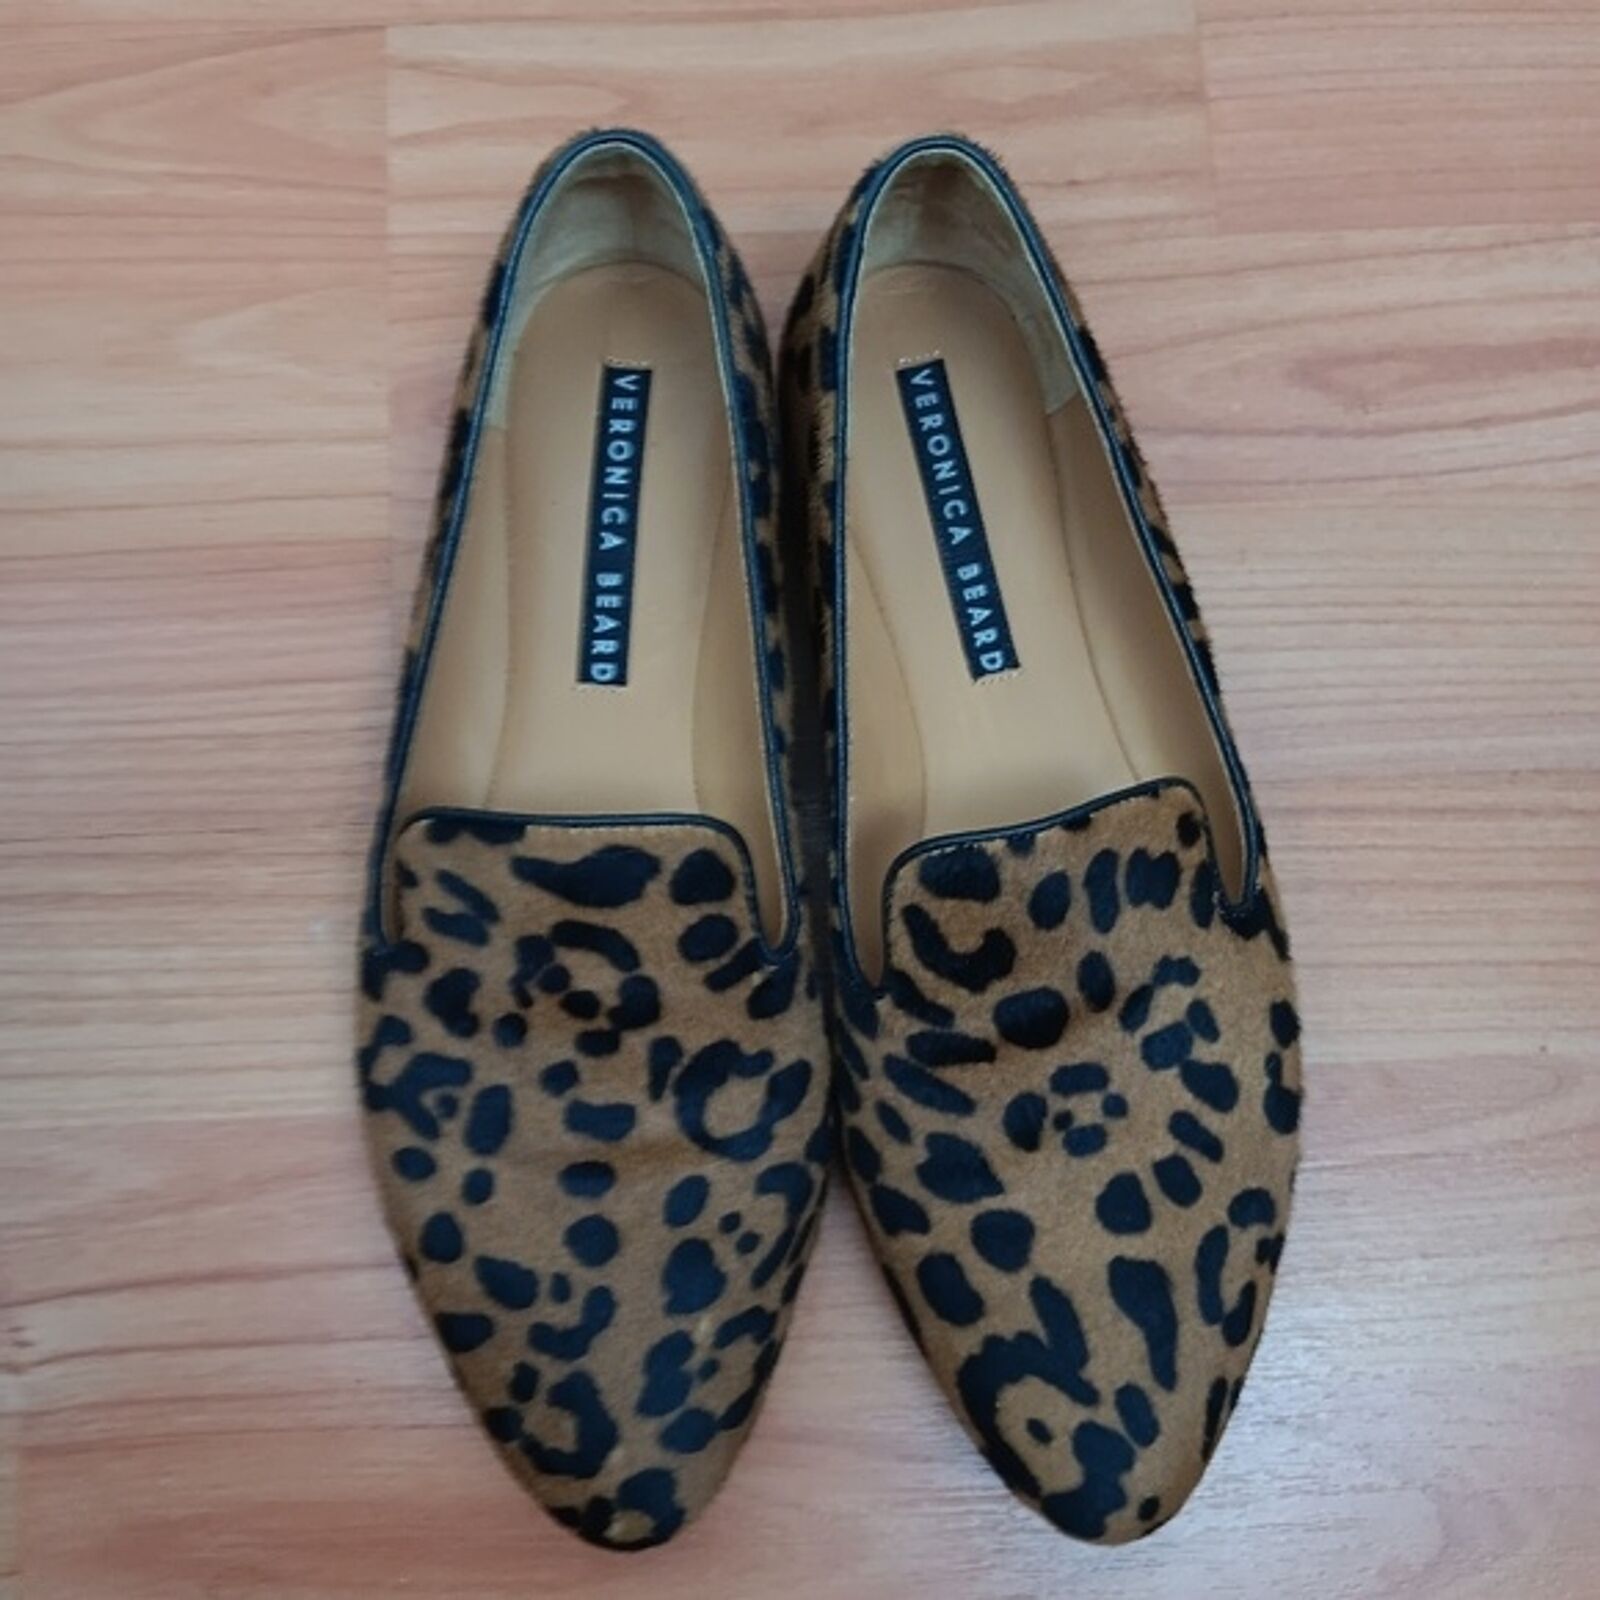 Veronica Beard Griffin Loafer Size 39 - image 1